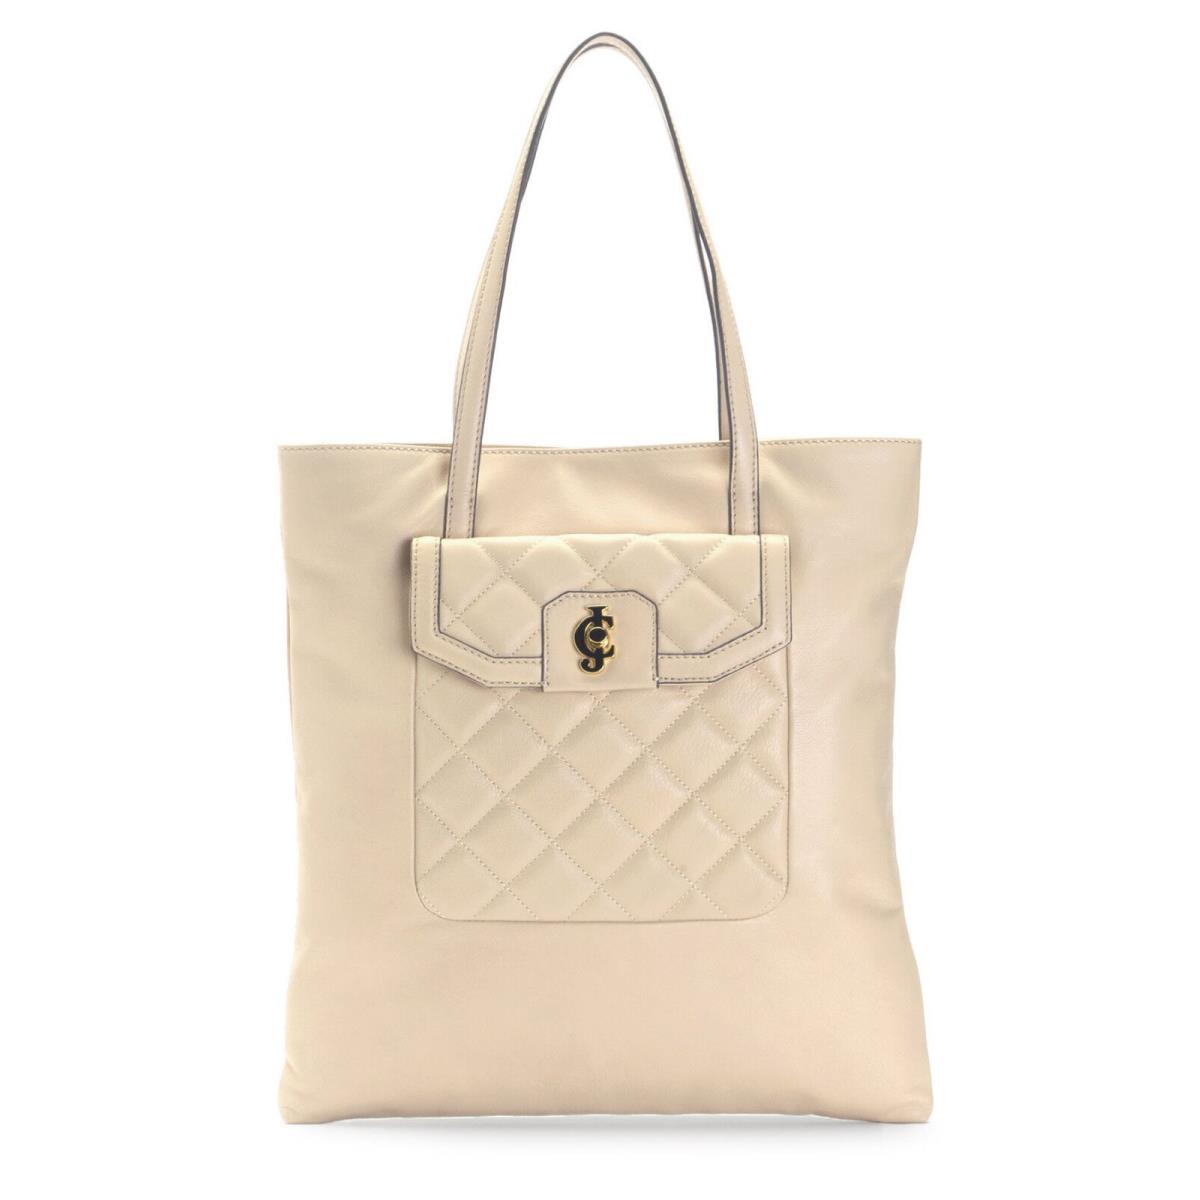 Juicy Couture Golden Autumn Caramel Desert Oasis Quilted Leather Tote